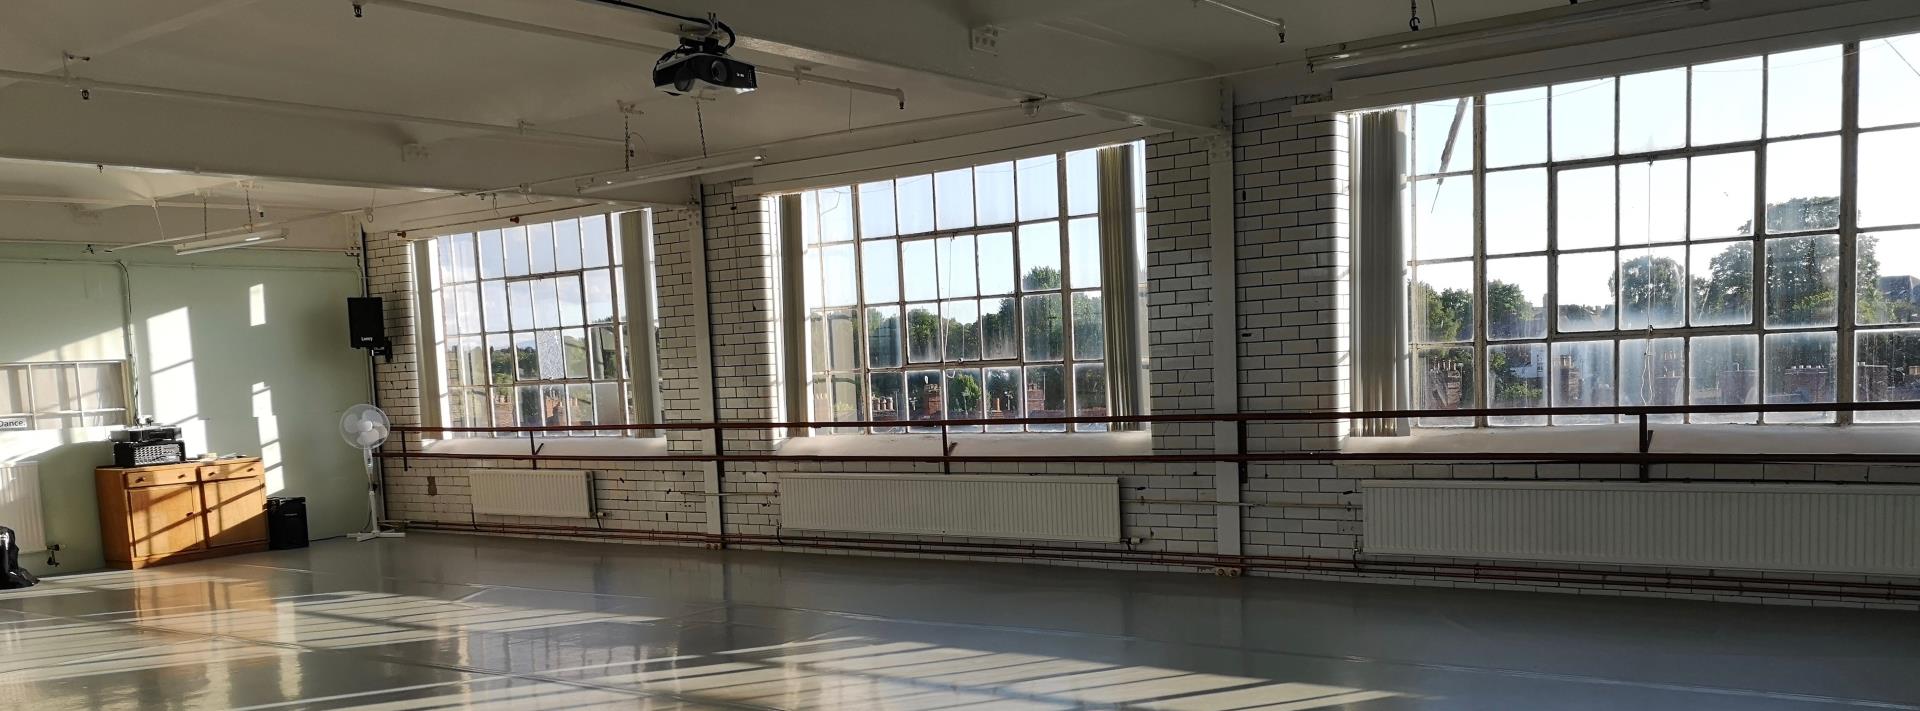 Accredited, Professional Ballet Lessons in Carlisle, Cumbria from Cumbria Ballet